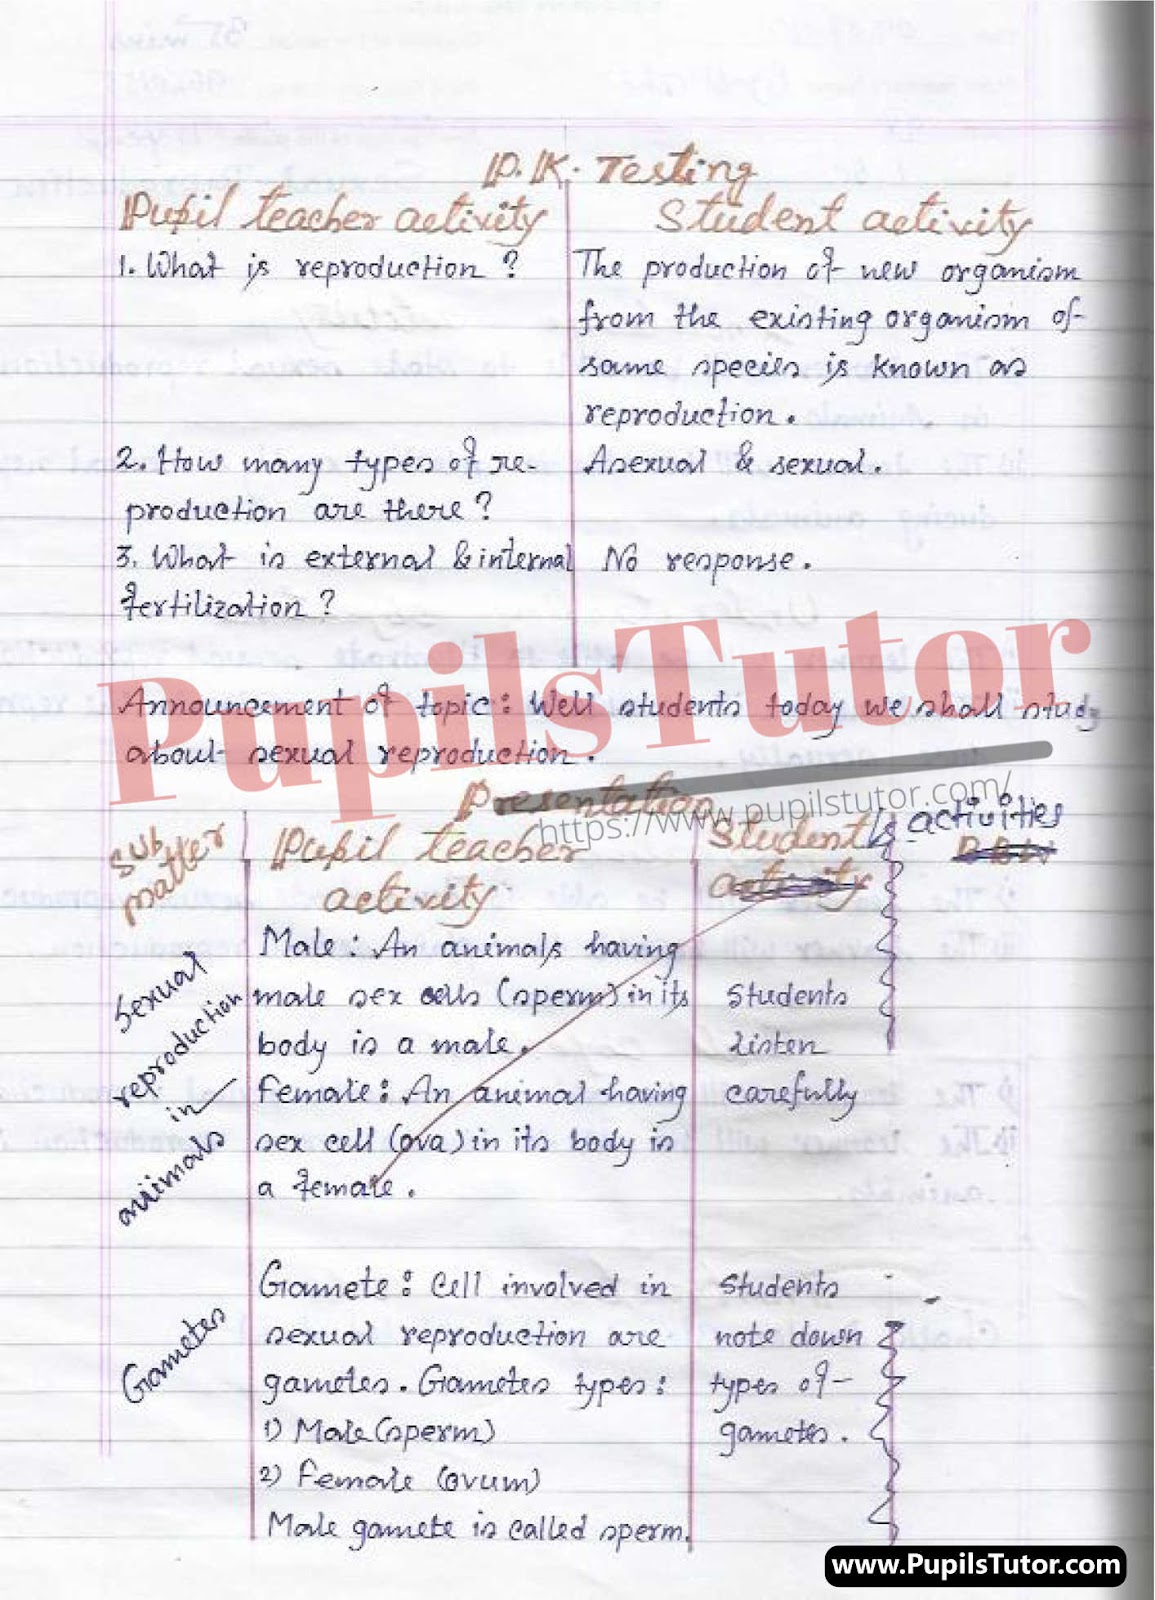 School Teaching Skill Sexual Reproduction And Fertilization Lesson Plan For B.Ed And Deled In English Free Download PDF And PPT (Power Point Presentation And Slides) – (Page And Image Number 2) – PupilsTutor